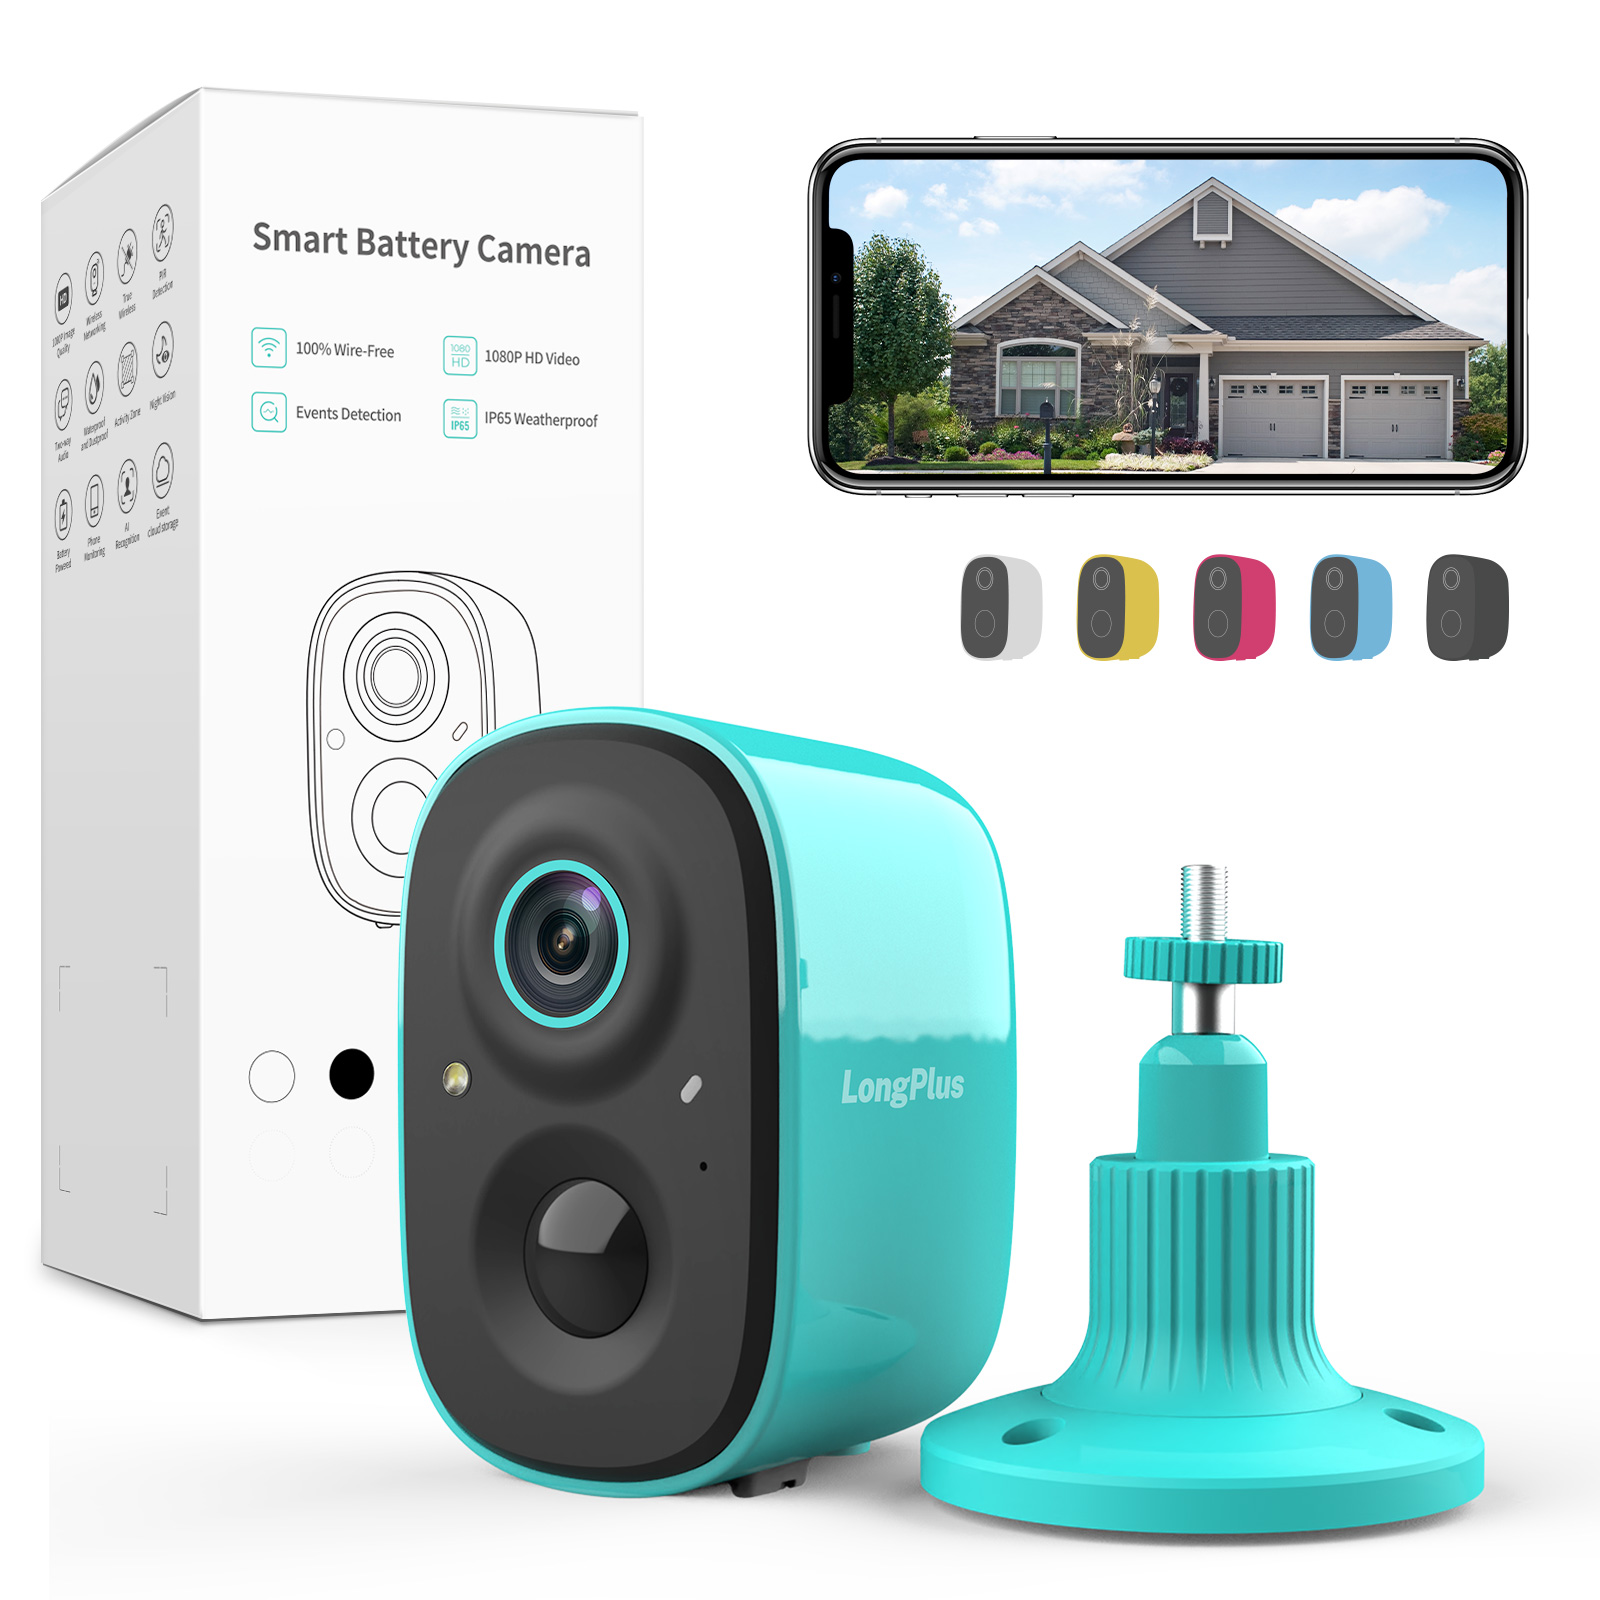 LongPlus X83 wireless cameras for home security-5